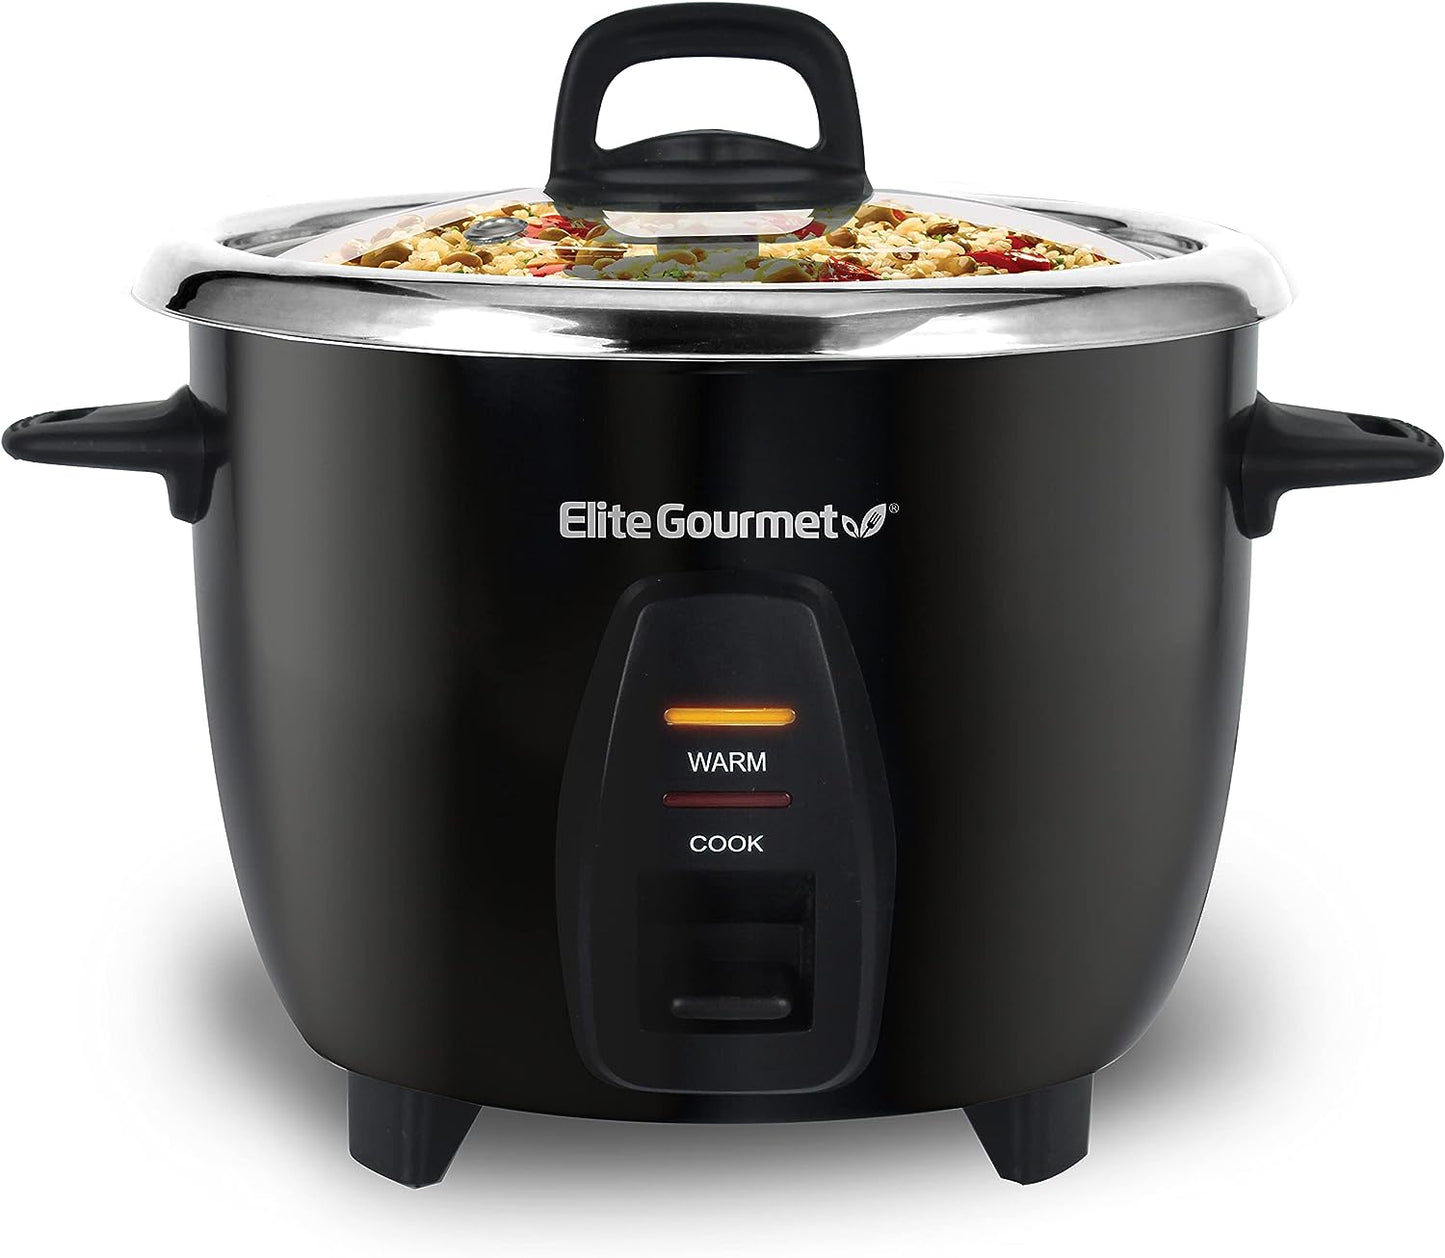 Elite Gourmet 10 Cup Rice Cooker in Stainless Steel Pot